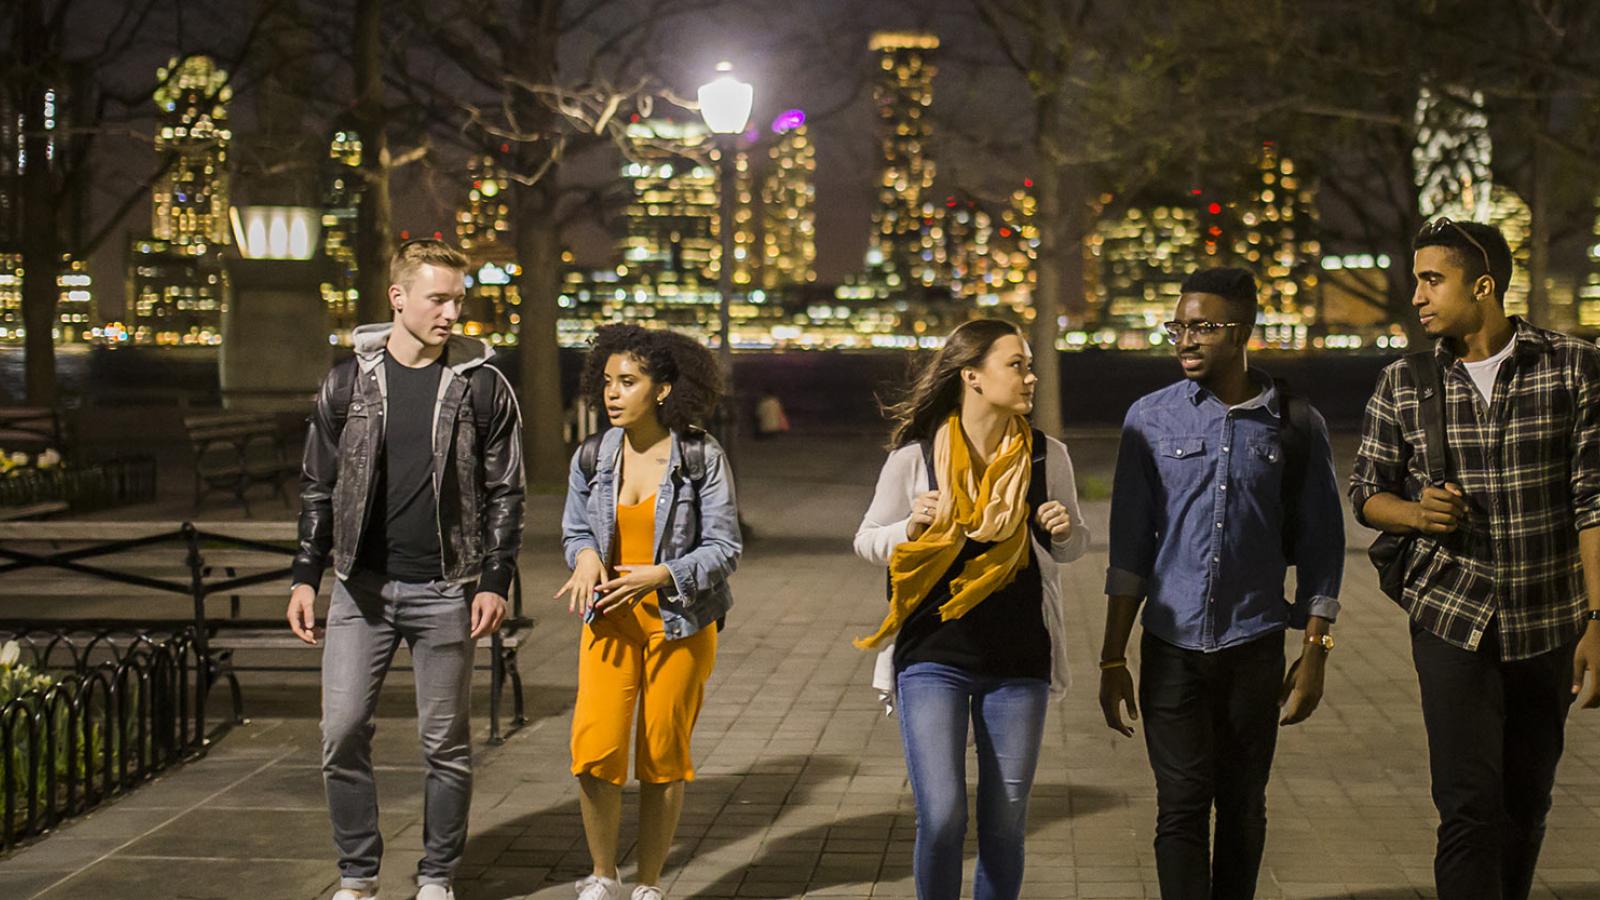 Five Pace students walking through a park at night.